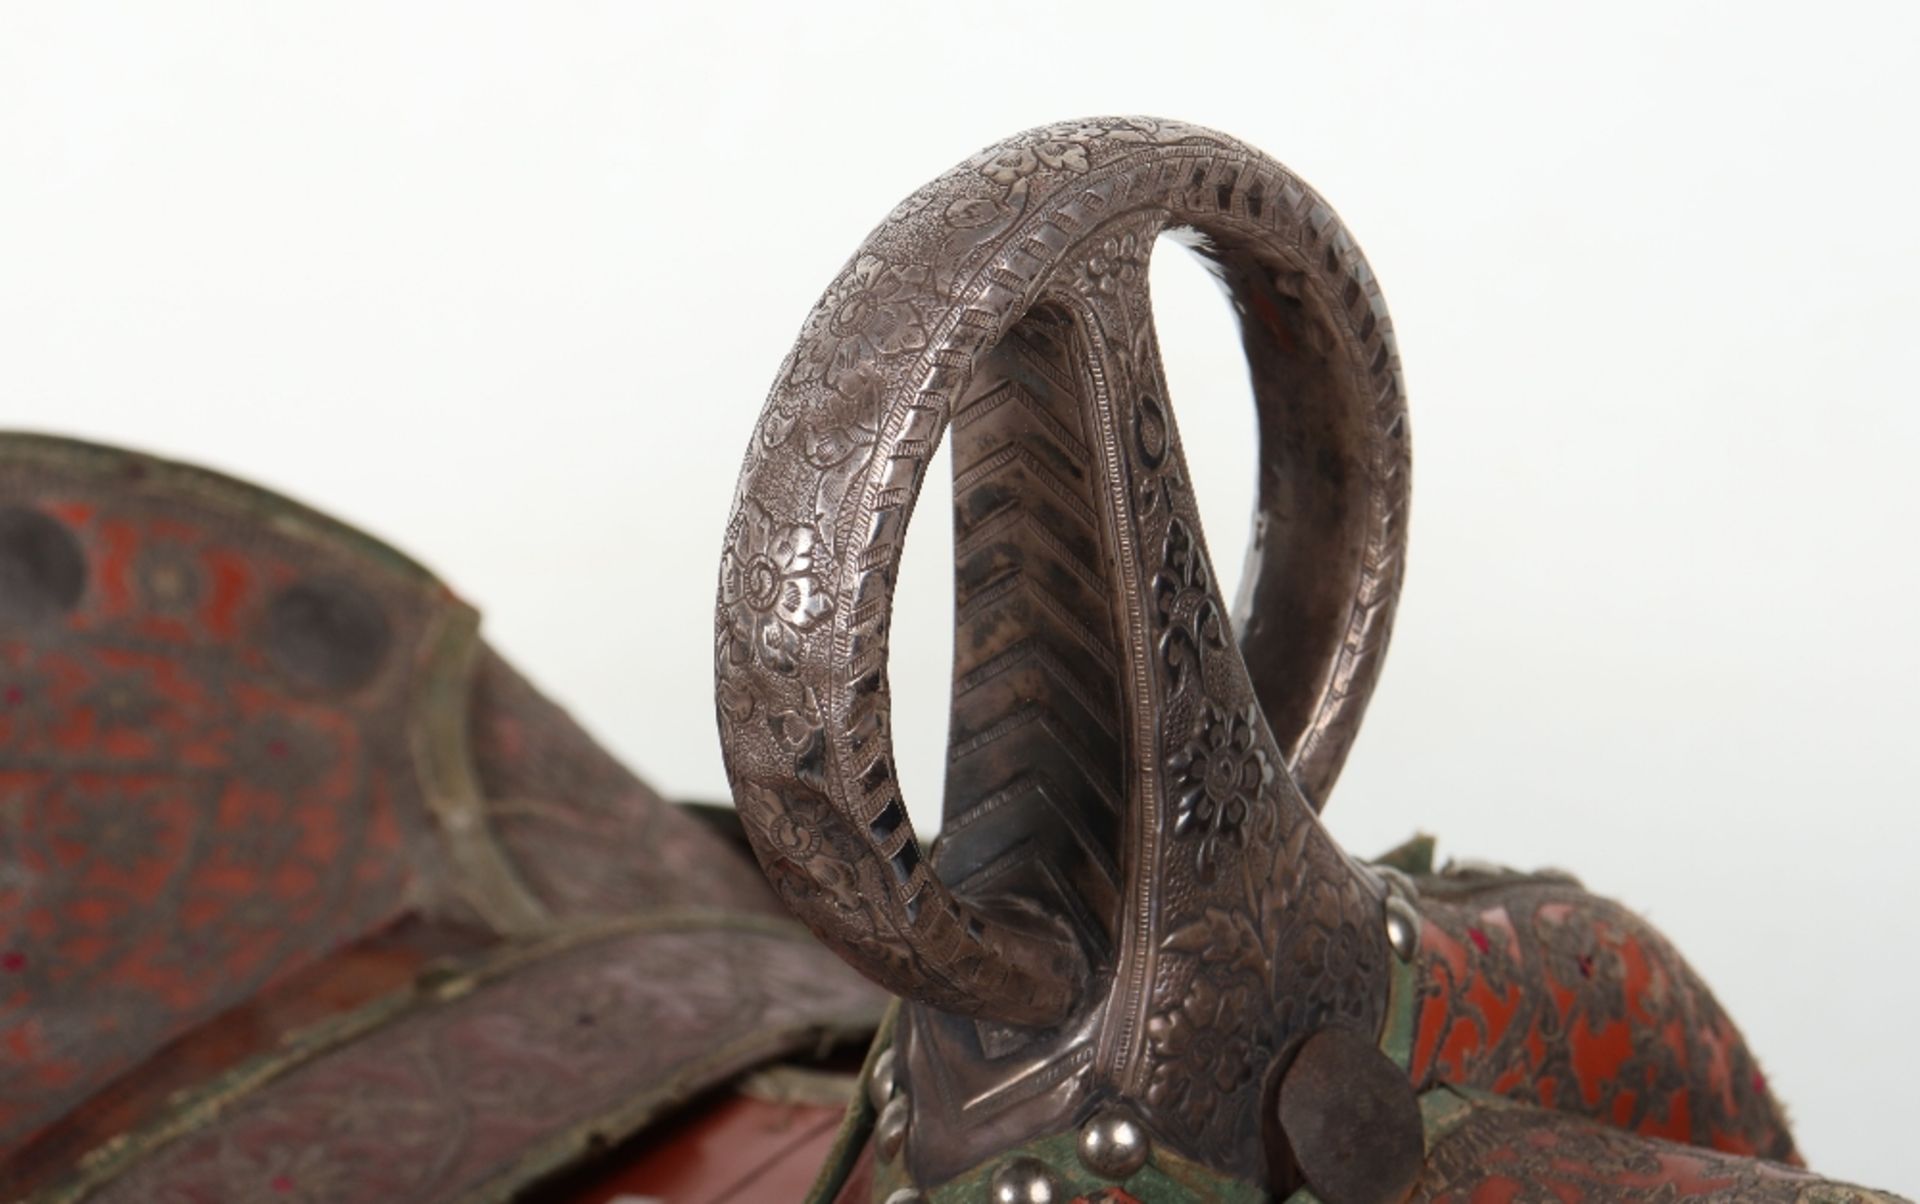 Fine and Scarce North Indian Saddle, Probably Late 19th or Early 20th Century - Image 8 of 12